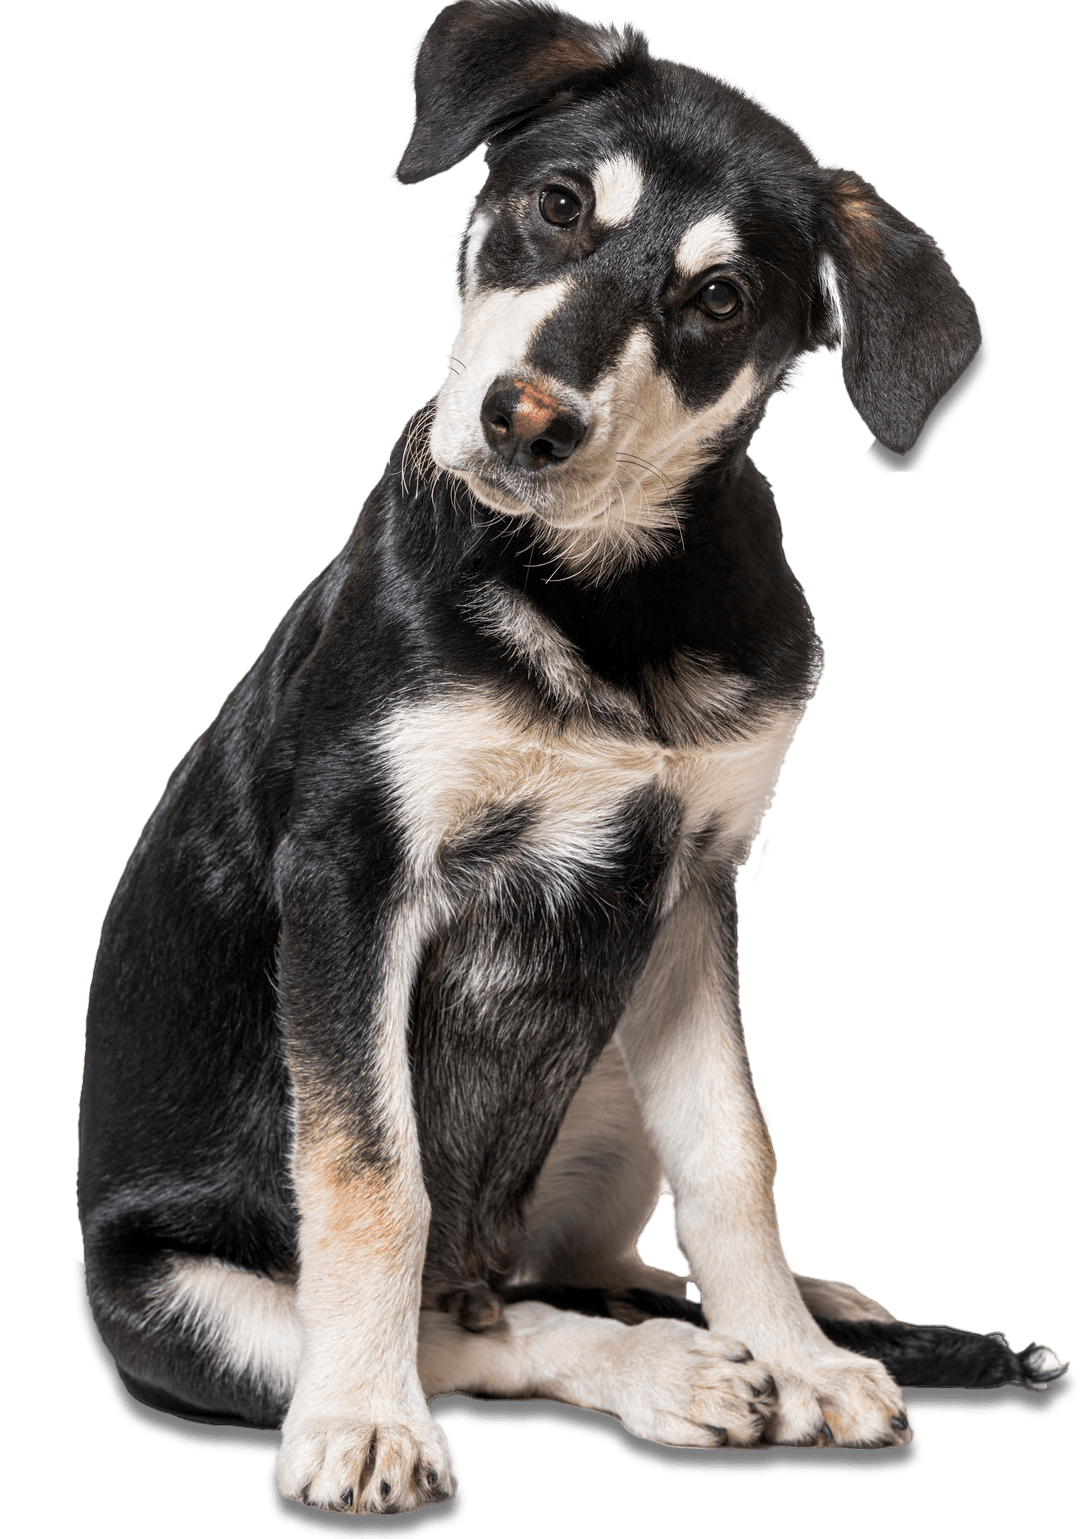 Cross Breed Black and White Dog - Riverview, MI - Riverview Animal Hospital